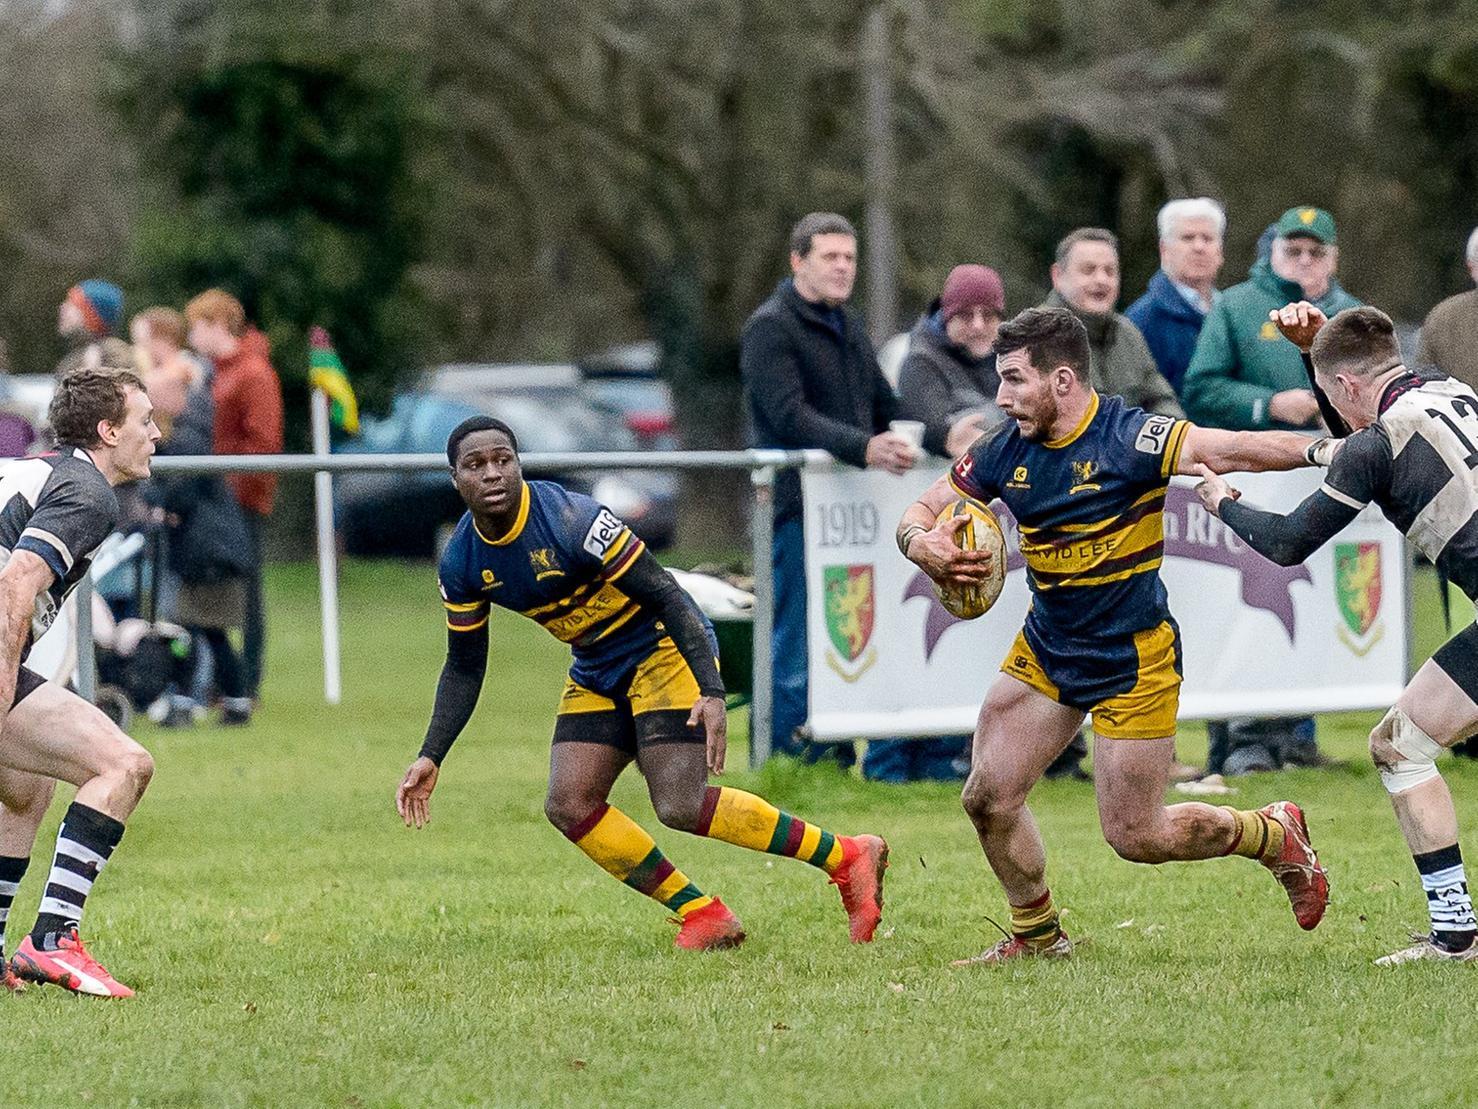 James Orbinson, with Michael Salu in support against league leaders Stratford on Saturday